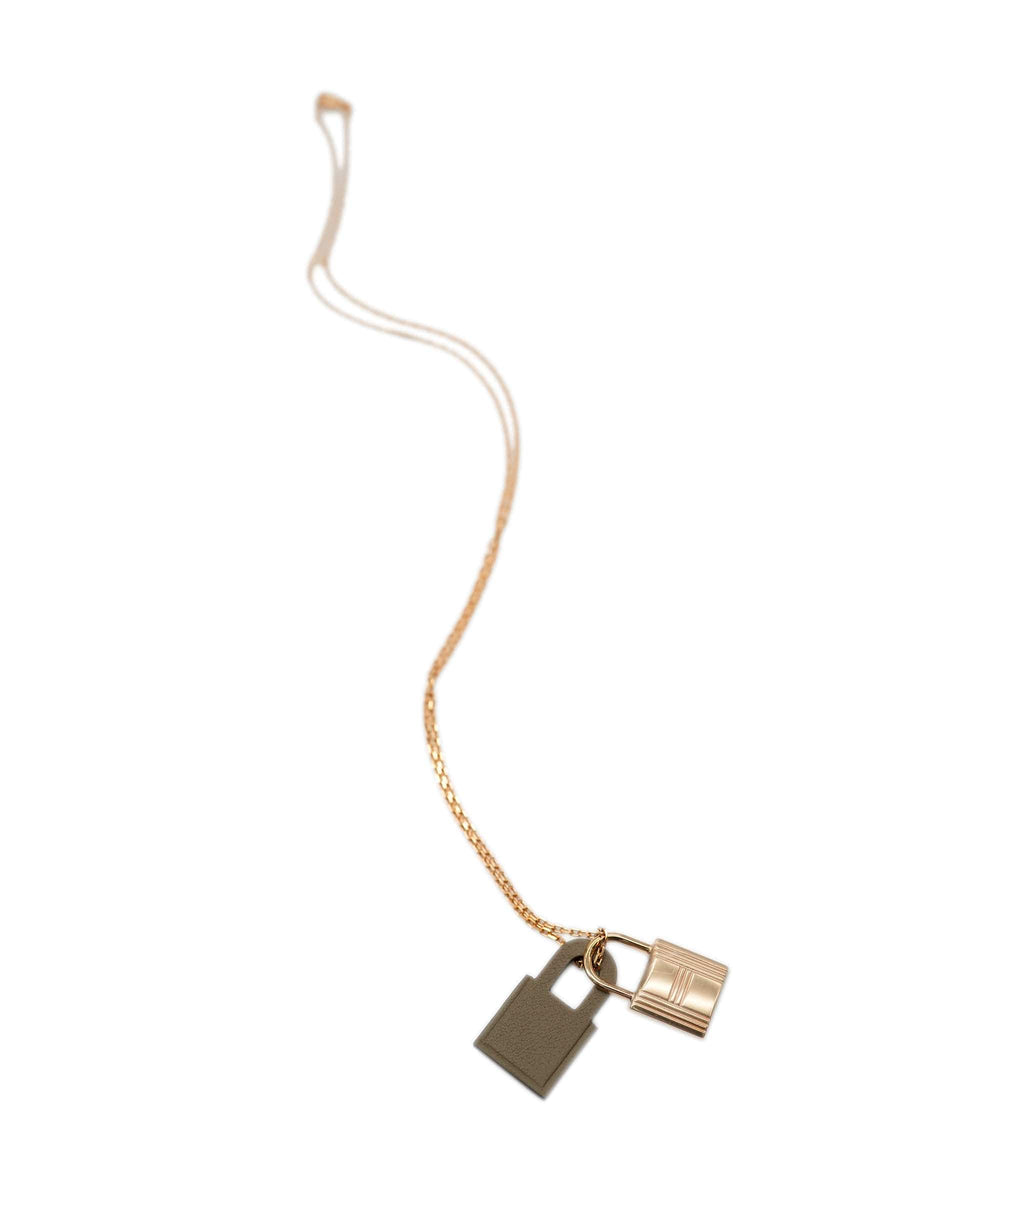 O'kelly necklace Hermès Gold in gold and steel - 36757671